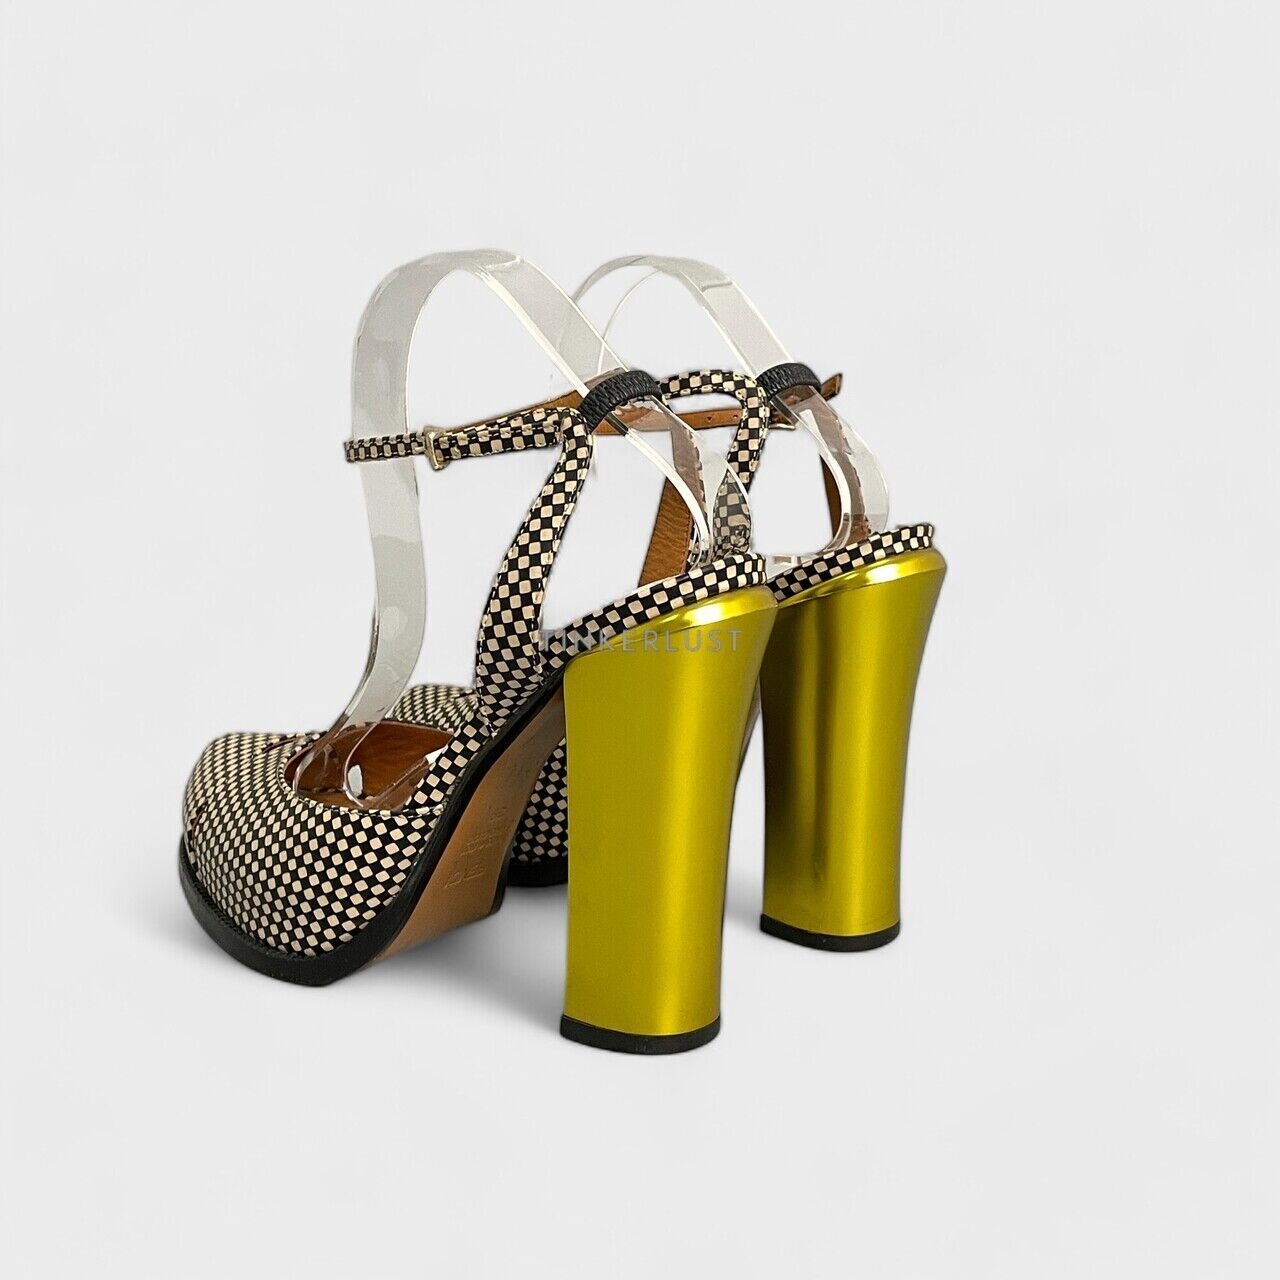 Fendi Two-tone Checkered Leather Ankle Strtap Pumps Heels